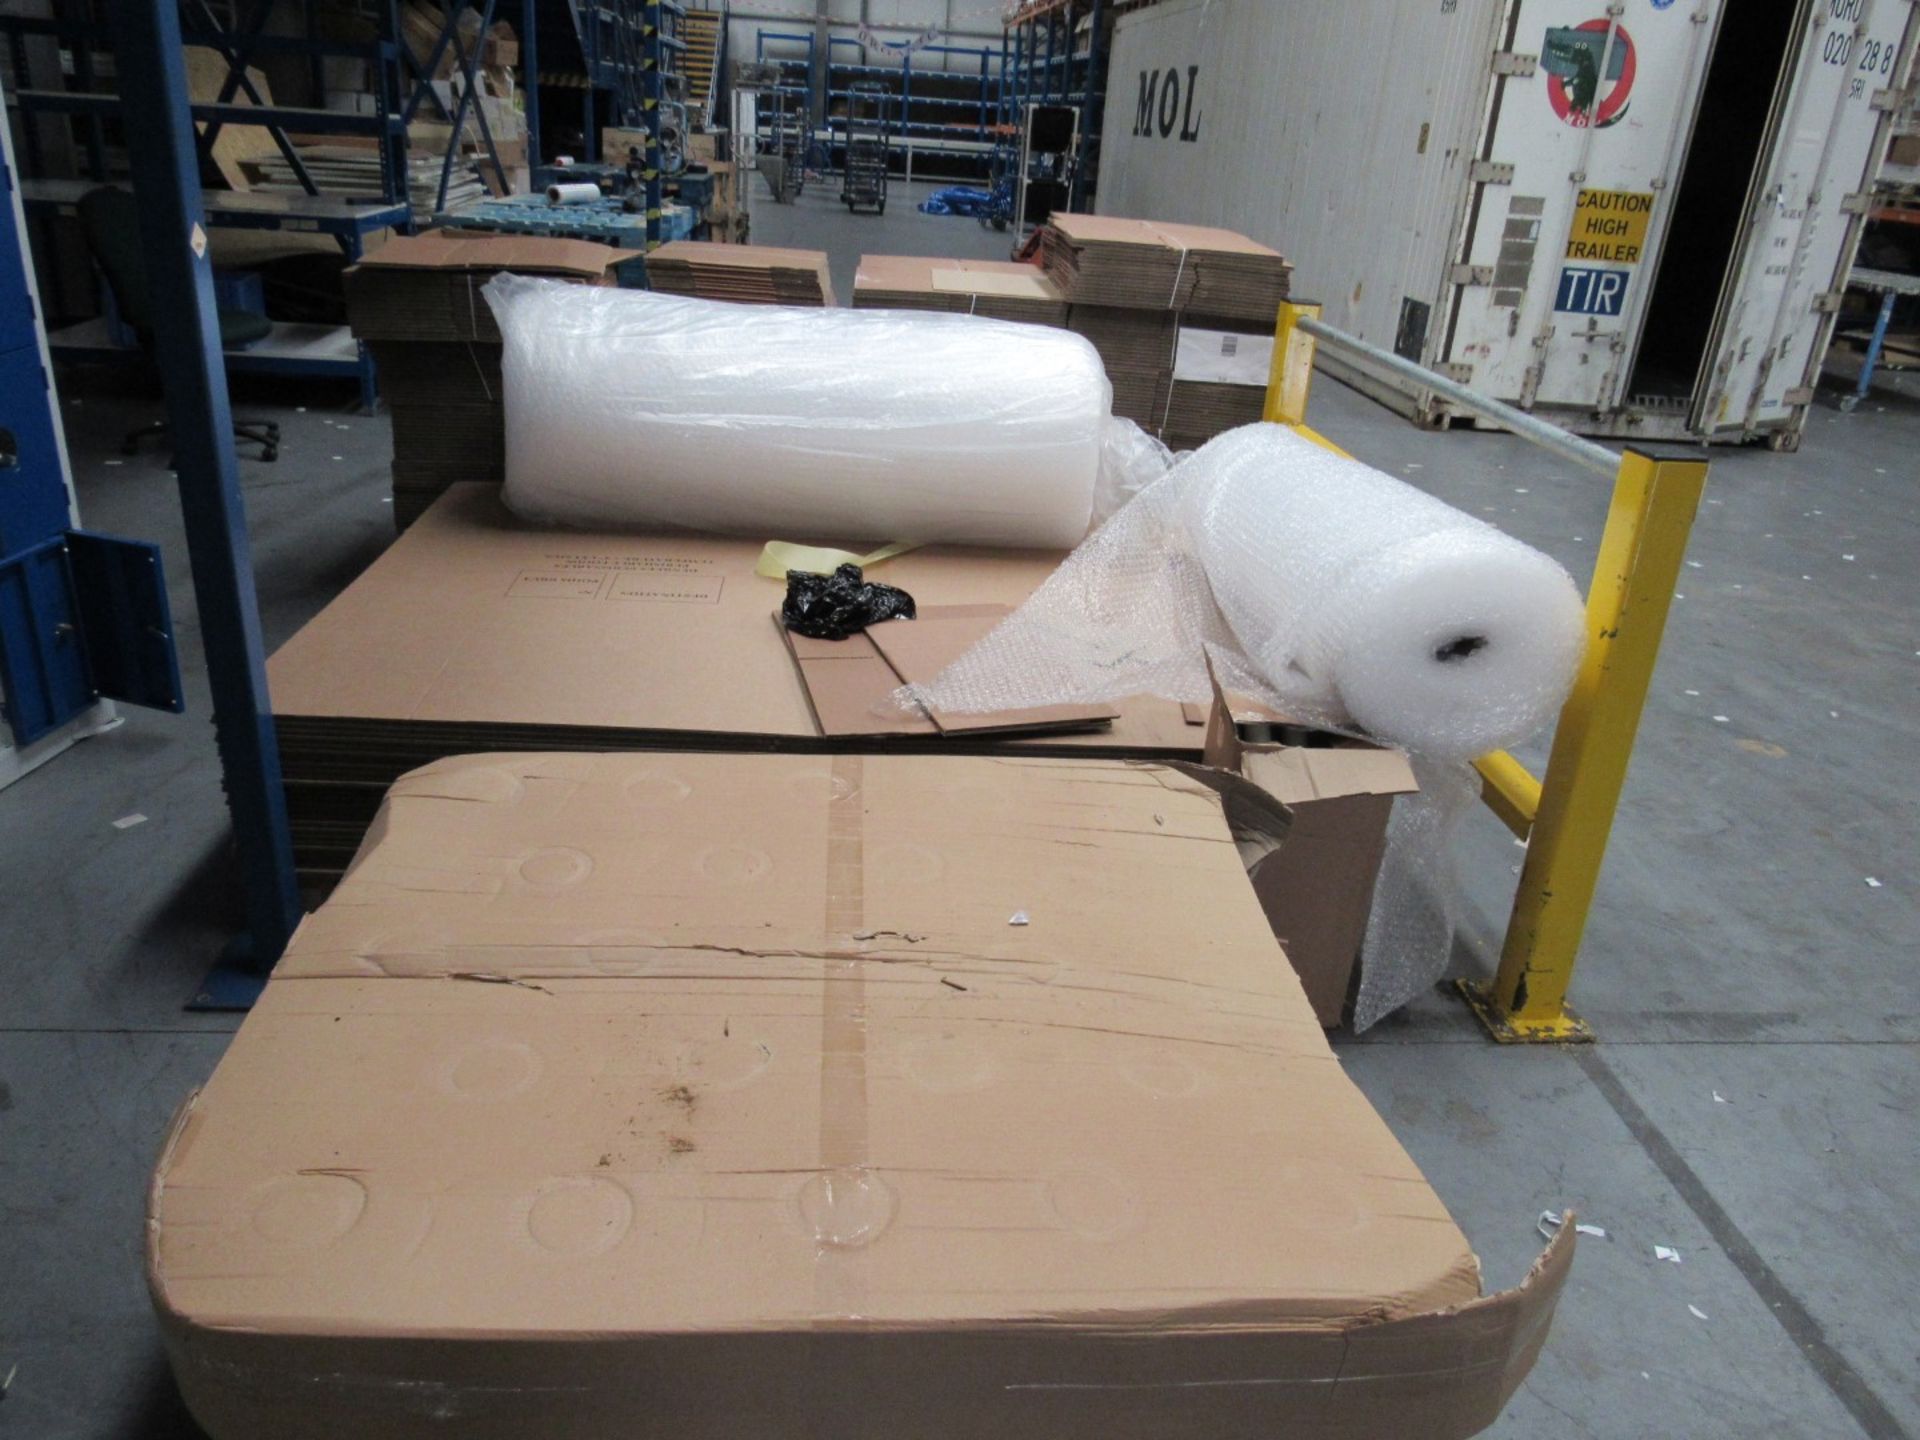 Quantity cardboard and packaging to 3 pallets